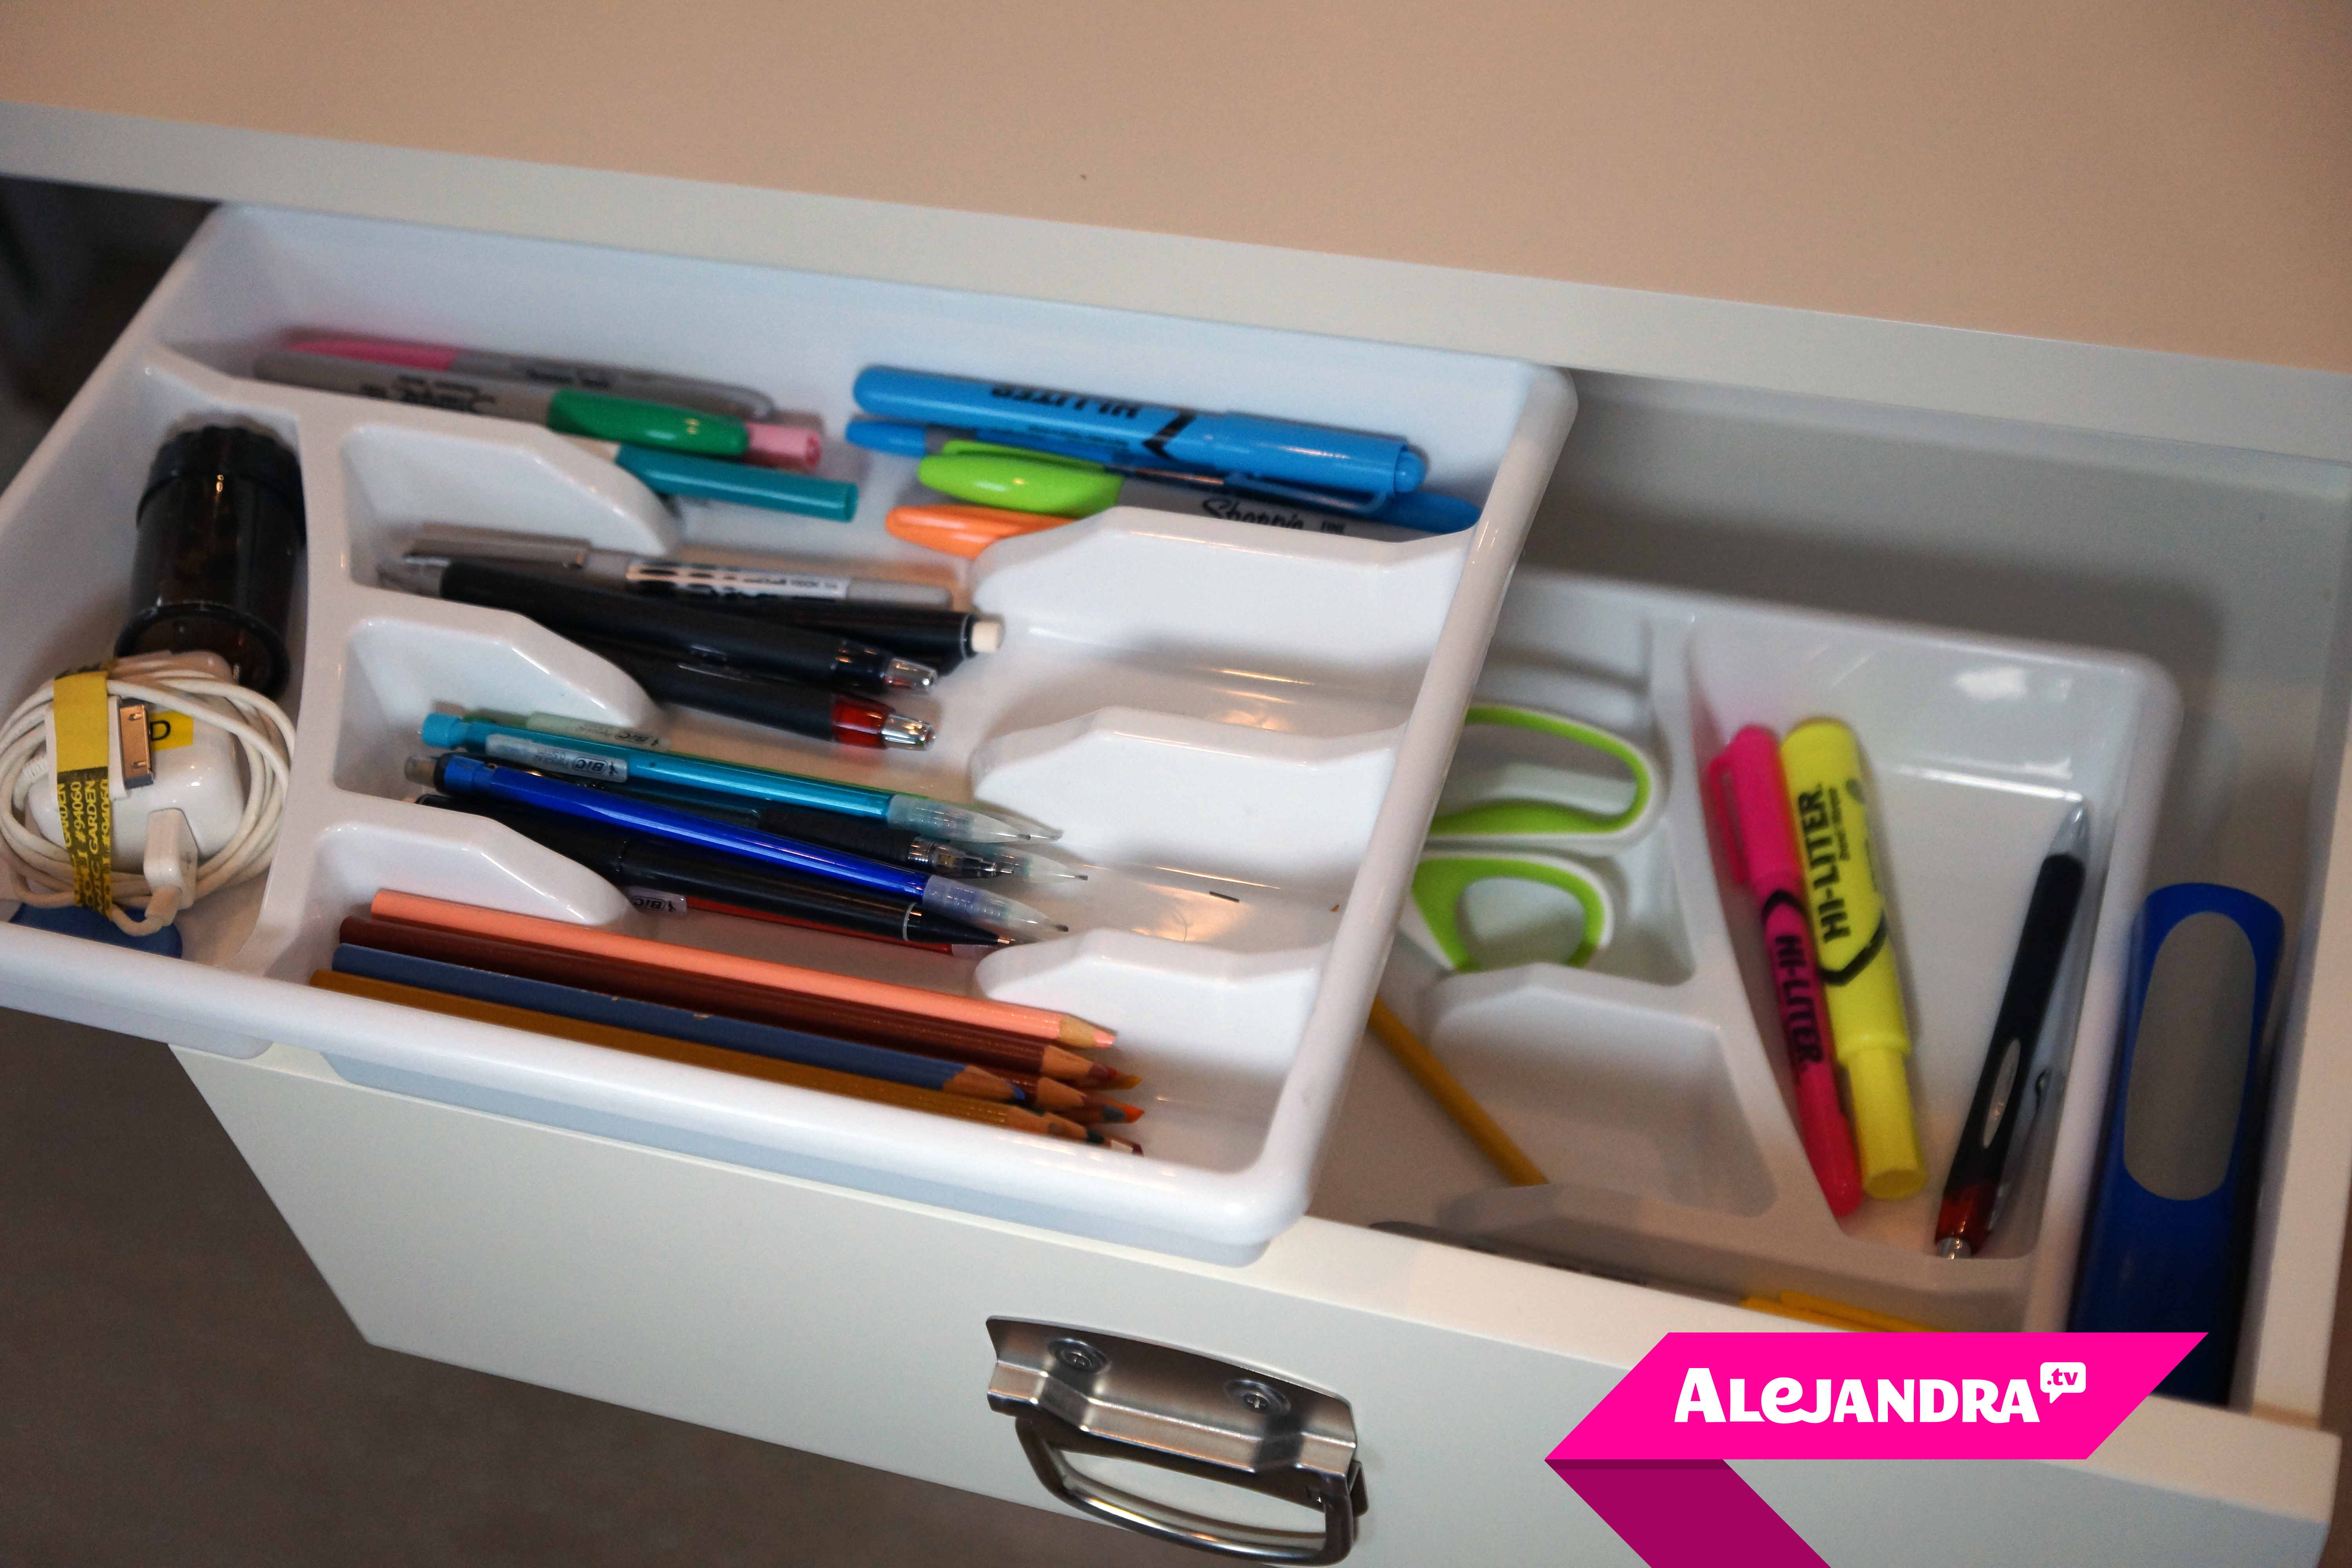 Bathroom Drawer Organize on a Budget: Dollar Store Products for the Win!